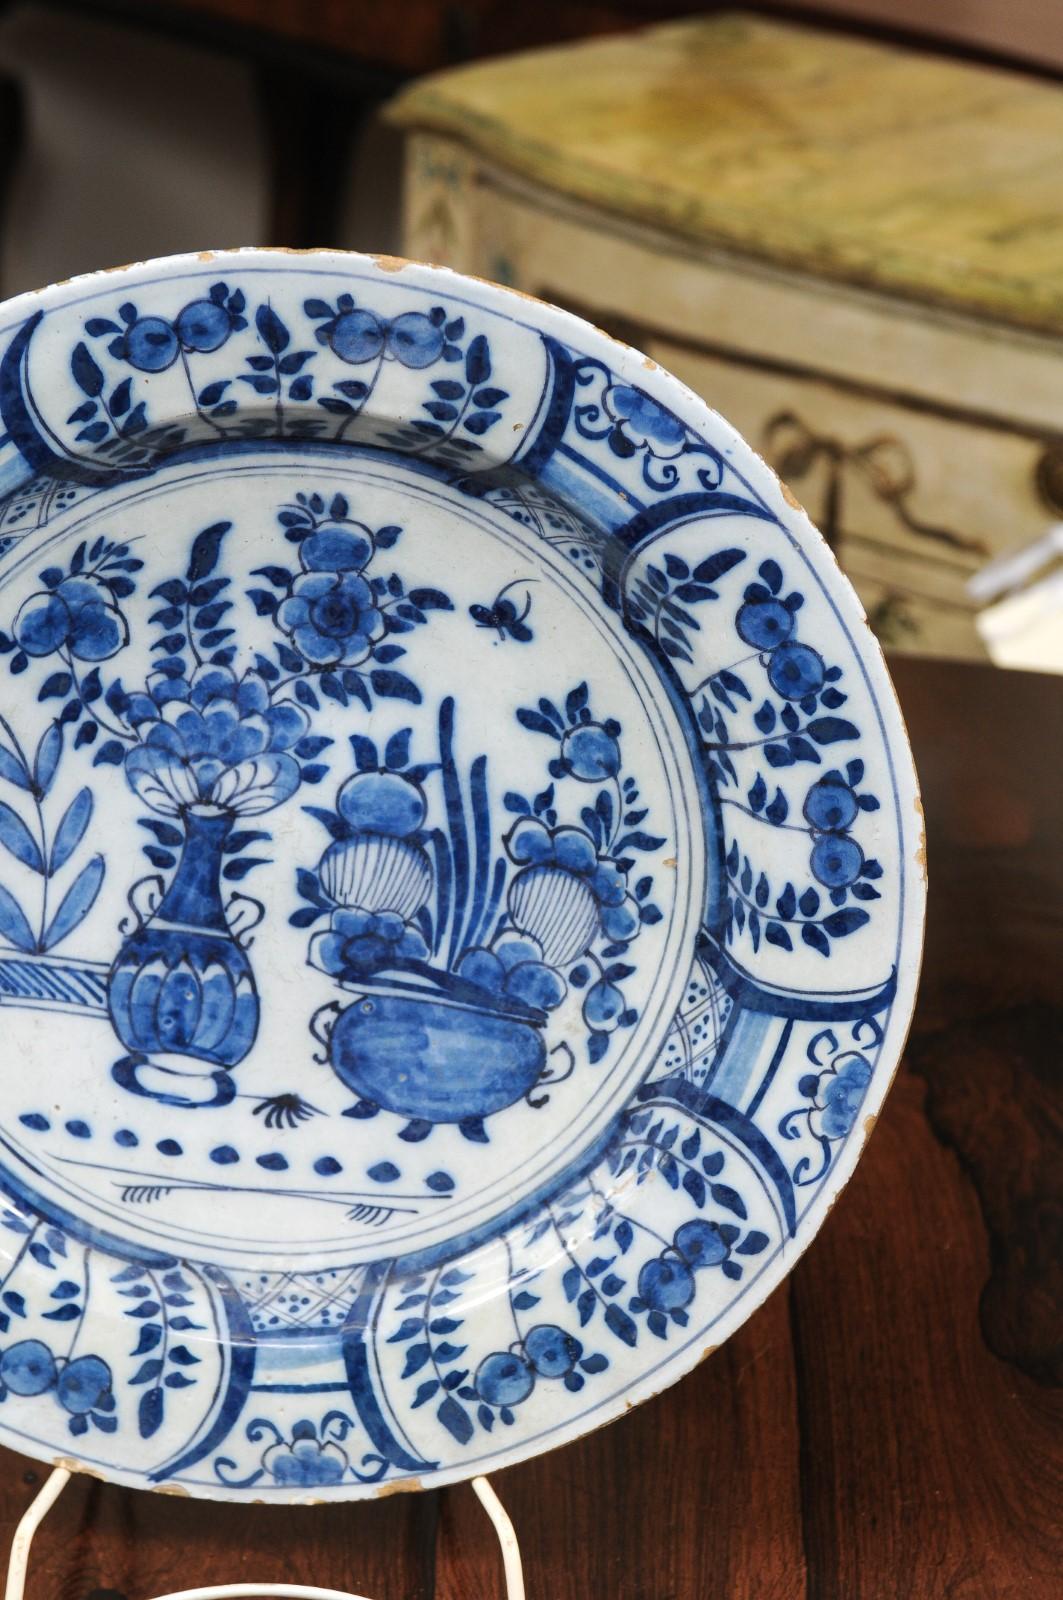 Pottery Dutch Blue and White Charger, 18th Century